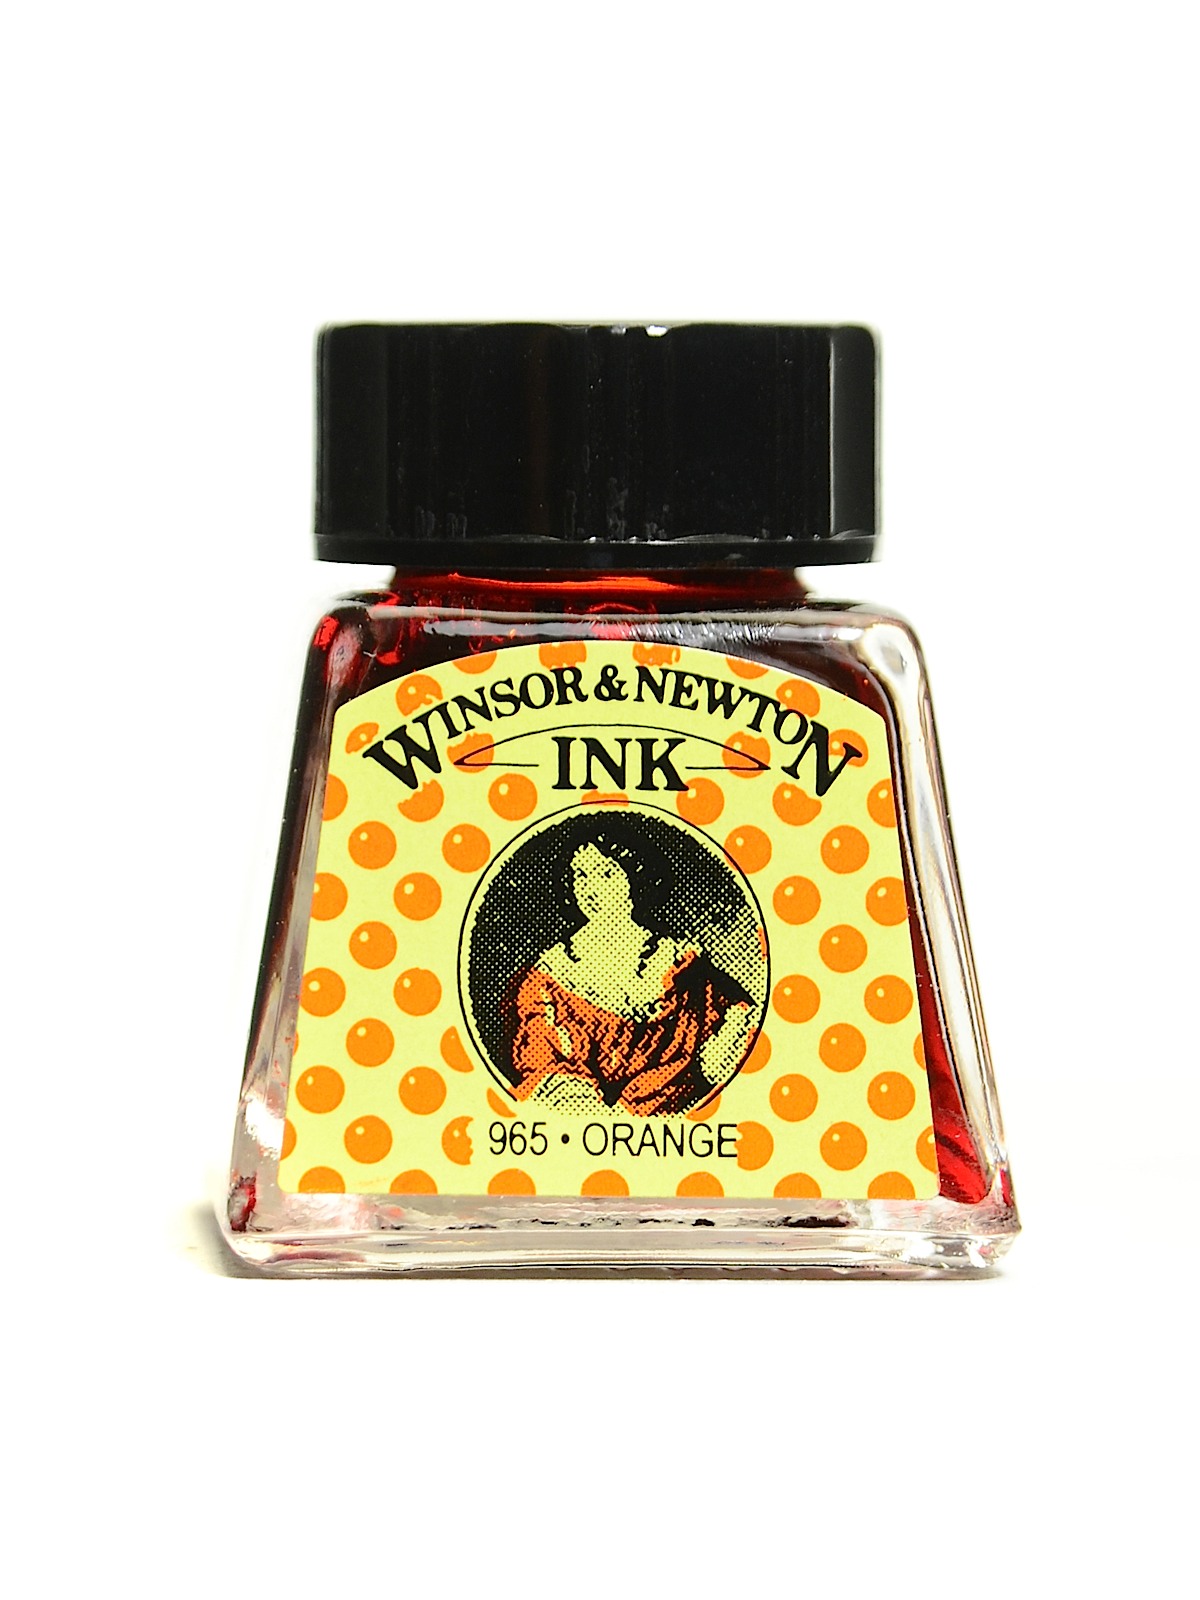  Winsor & Newton Drawing Inks Black Indian Ink 14 ml 30 [Pack of  4 ]